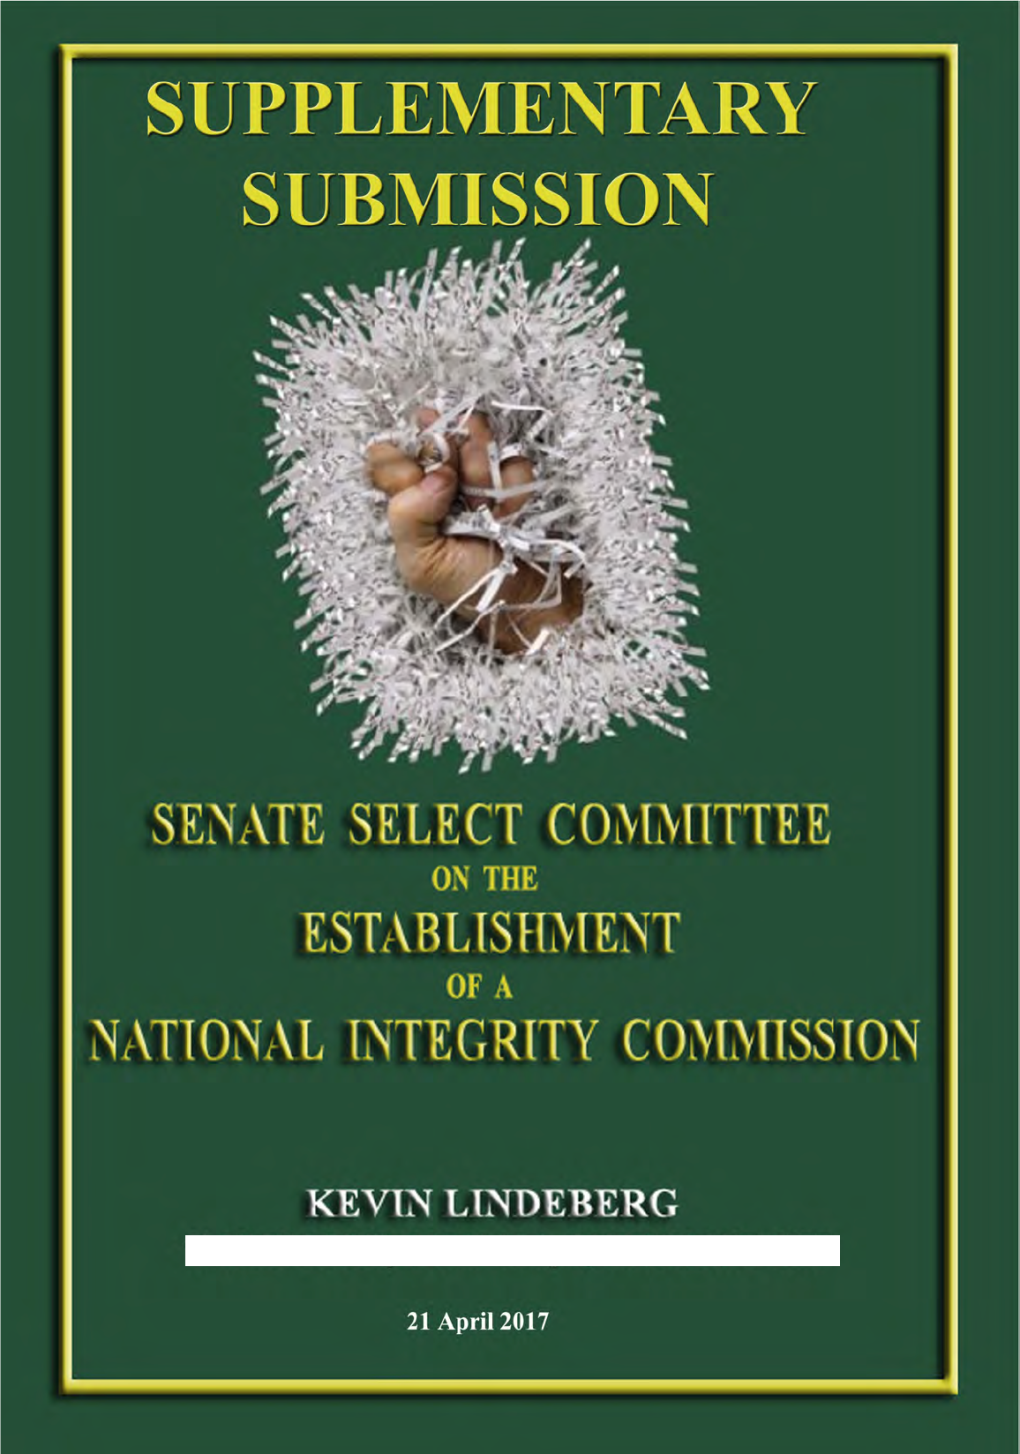 Select Committee on a National Integrity Commission Submission 33